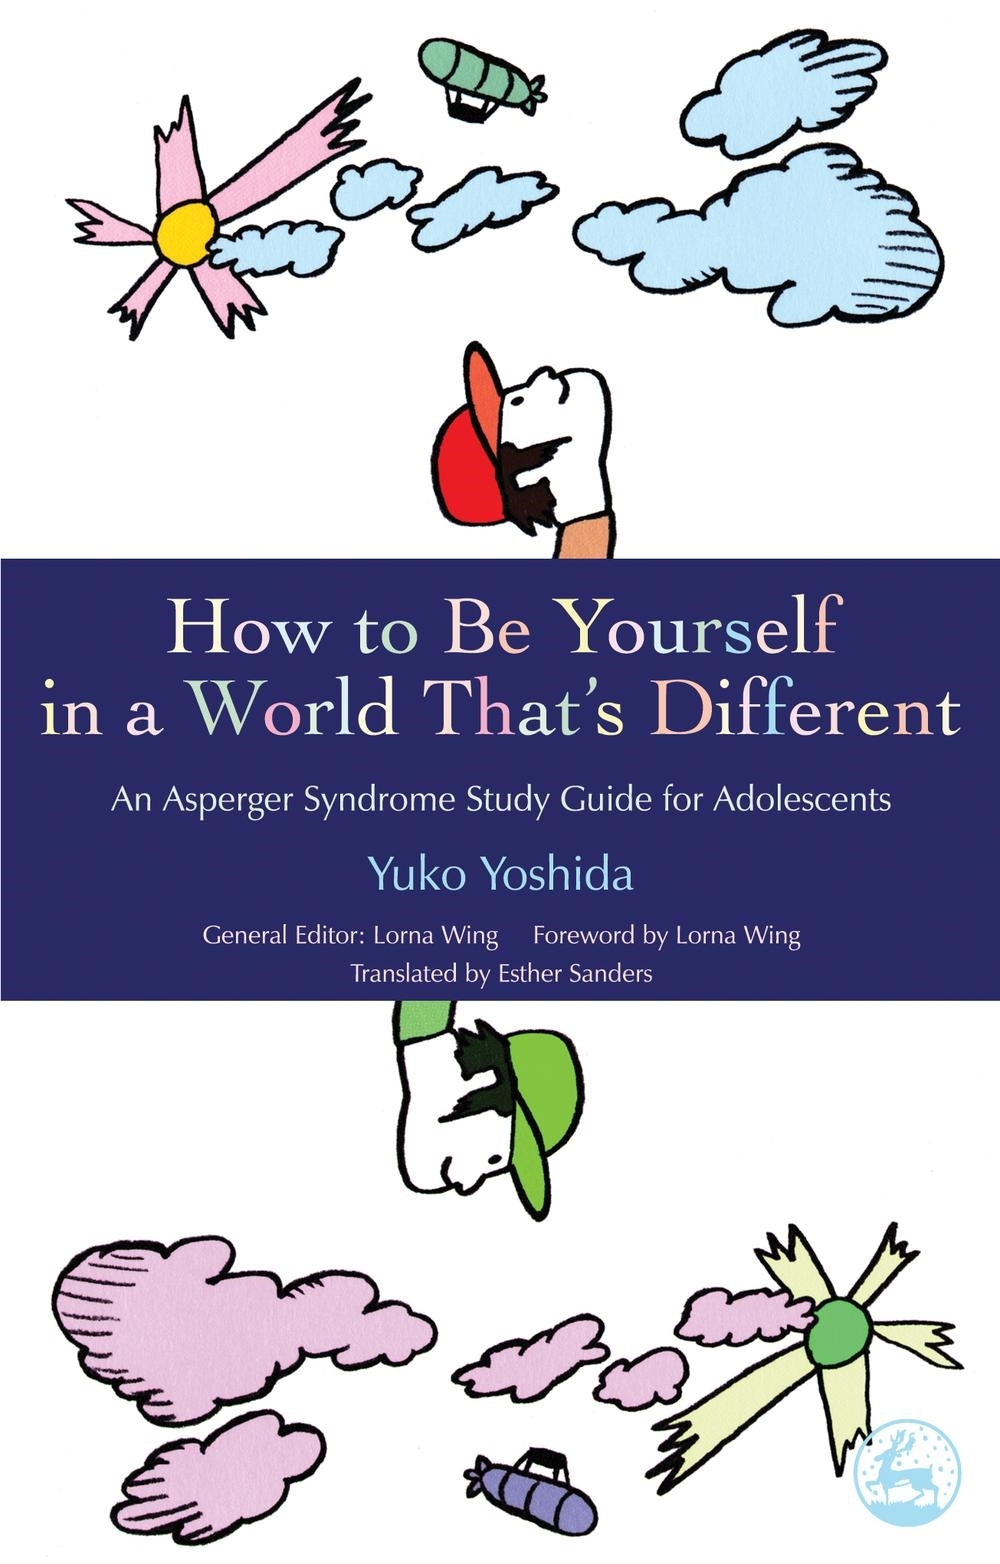 How to Be Yourself in a World That's Different by Yuko Yoshida